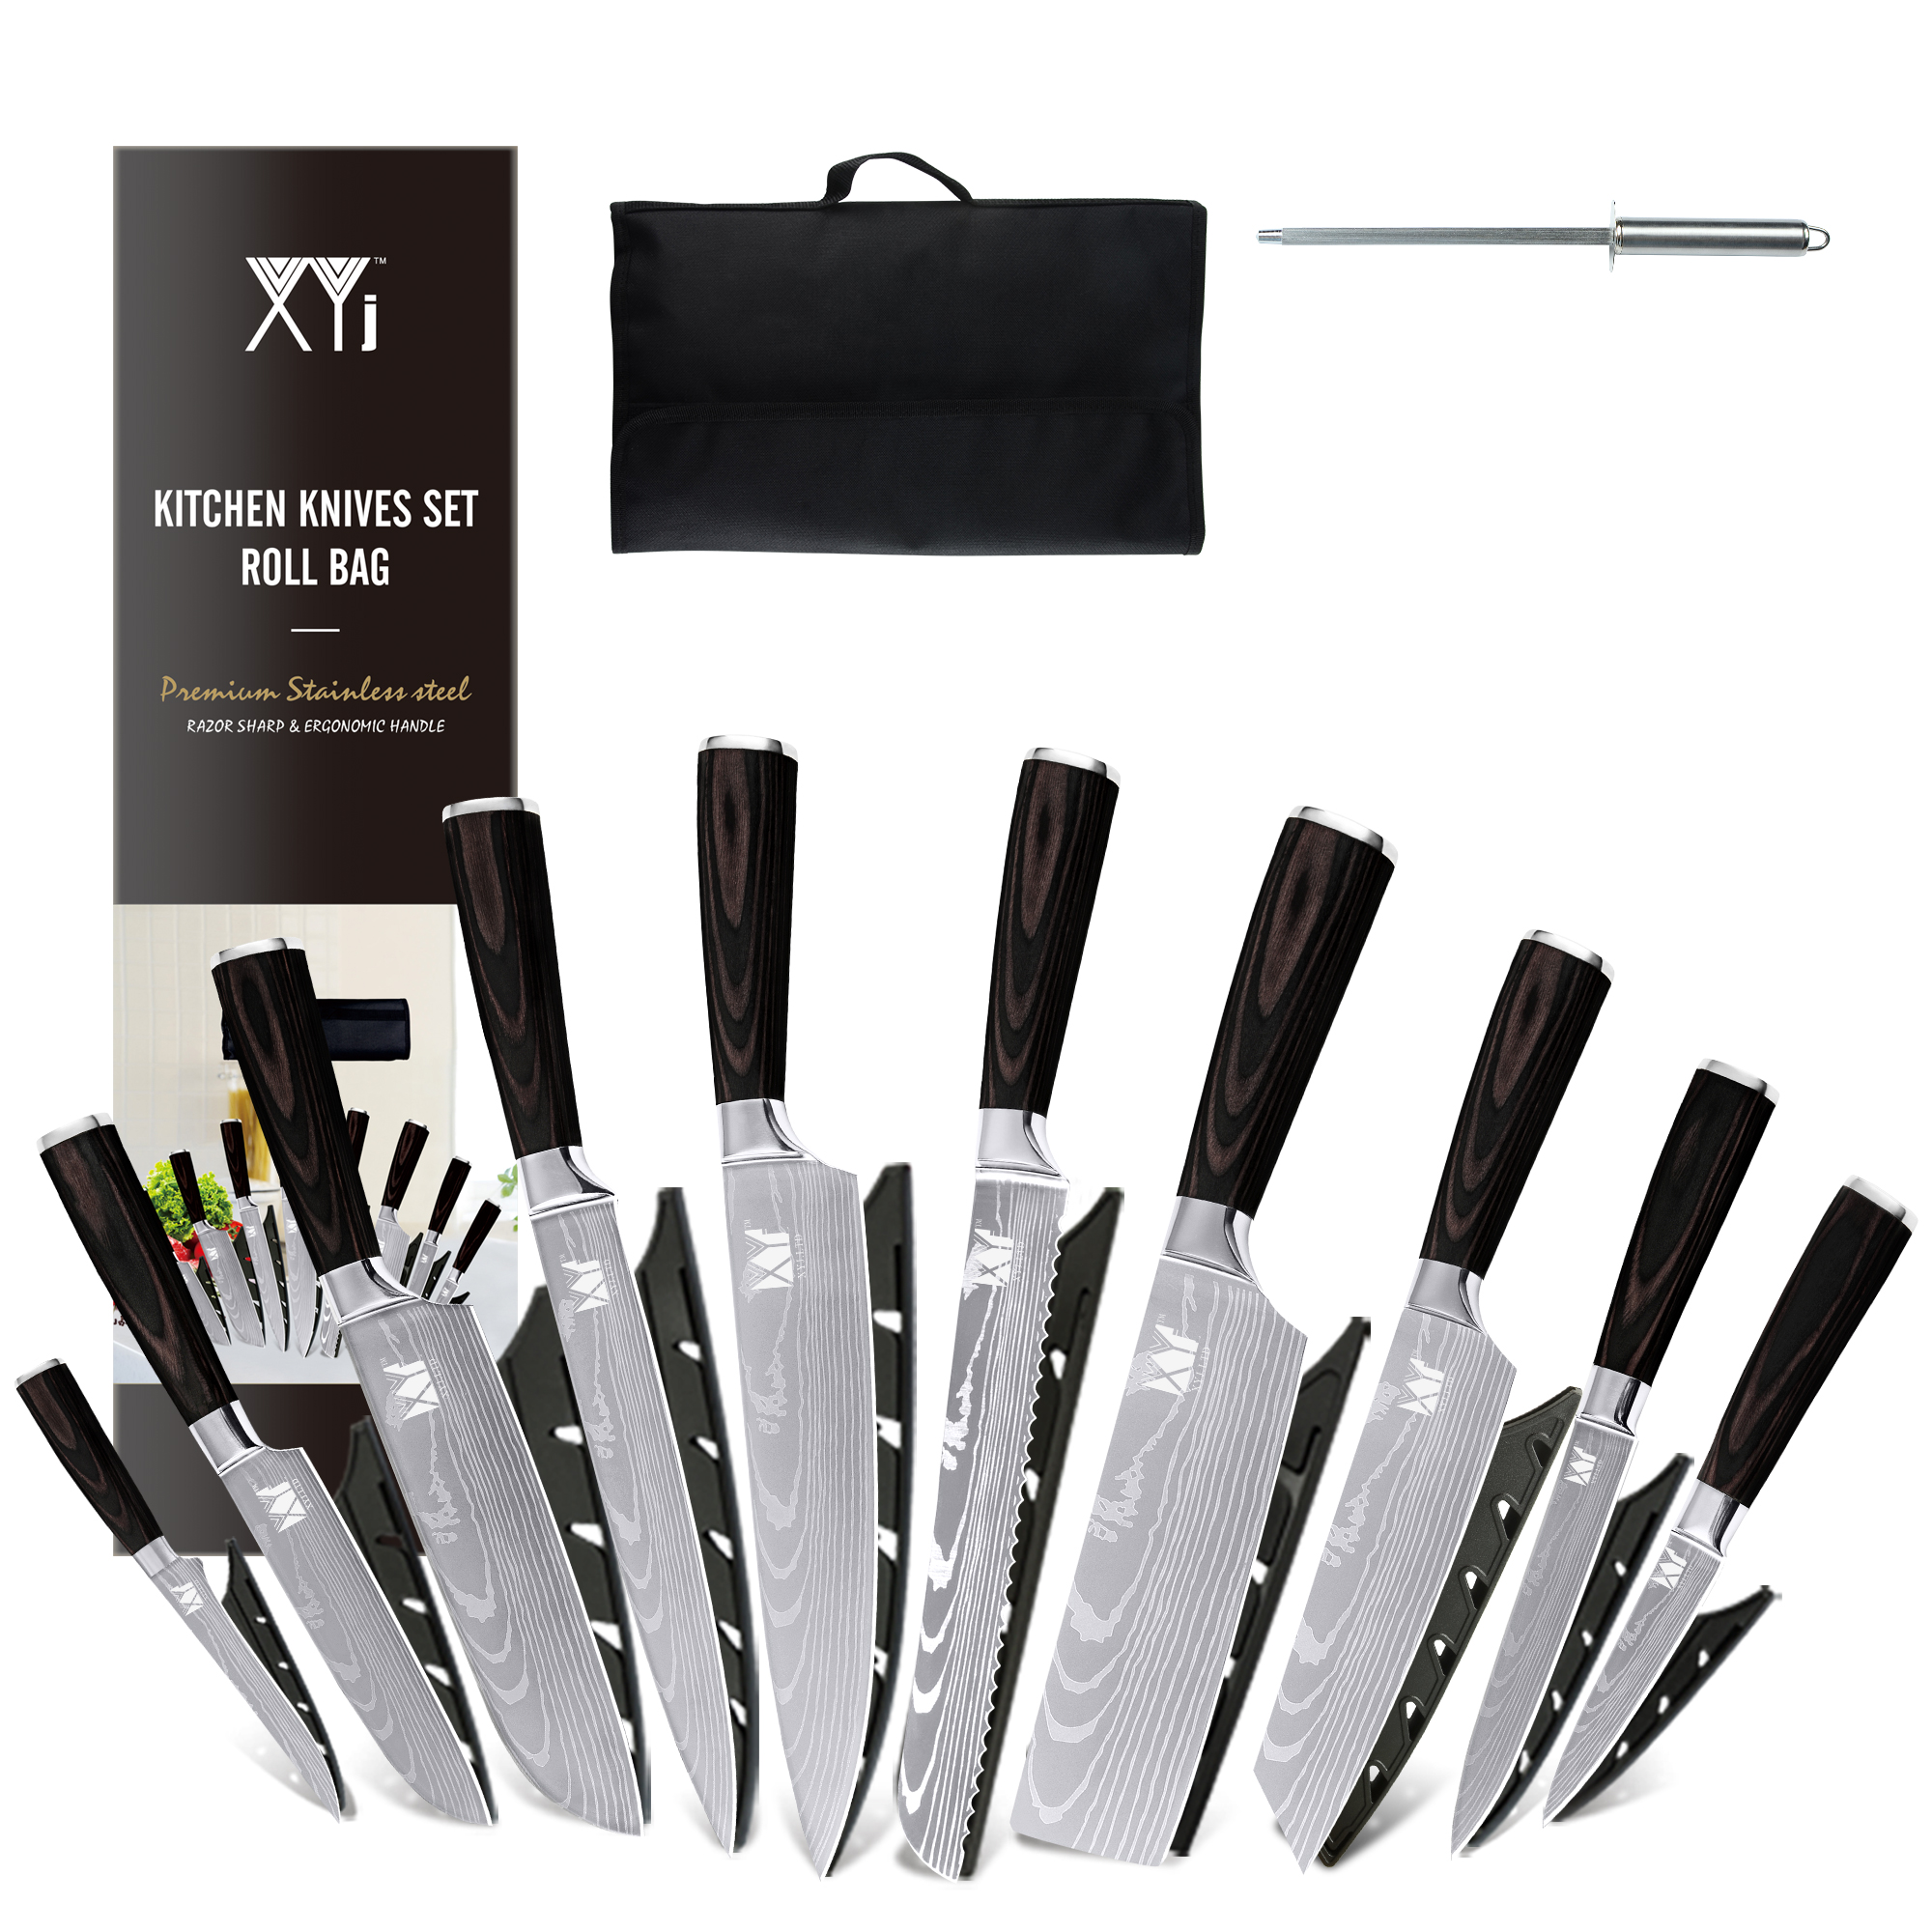 XYJ Authentic Since 1986,10 Pieces Kitchen Knife Set With Roll Bag